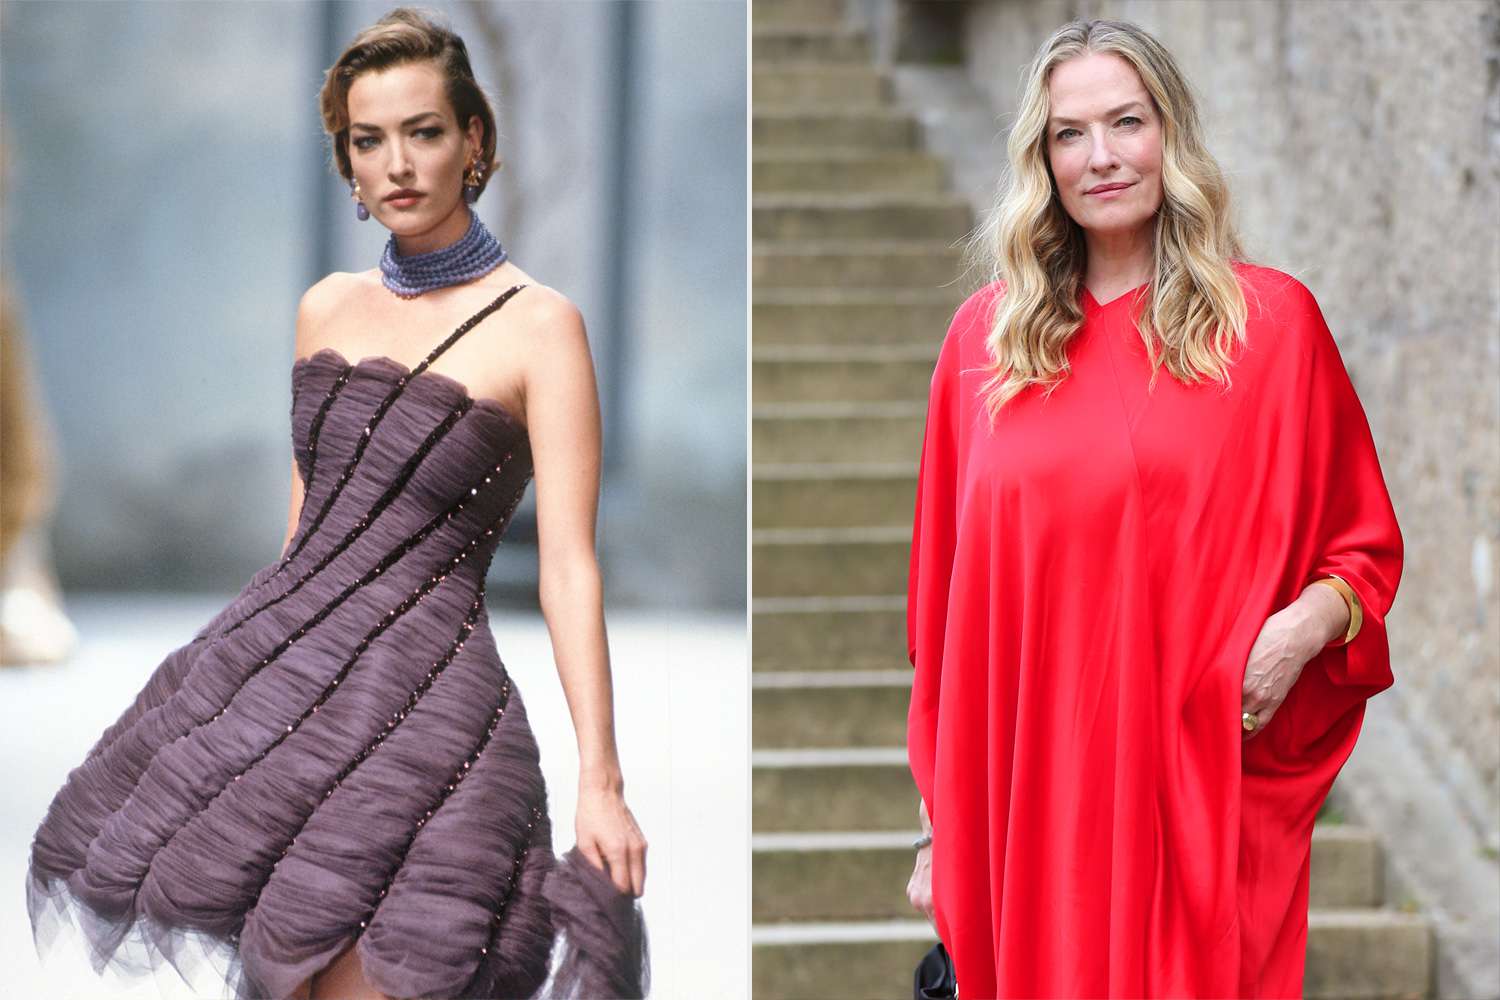 PARIS, FRANCE - JULY: Tatjana Patitz walks the runway during the Chanel Haute Couture show as part of Paris Fashion Week Fall/Winter 1991-1992 in July, 1991 in Paris, France. (Photo by Victor VIRGILE/Gamma-Rapho via Getty Images); MUNICH, GERMANY - APRIL 12: Model Tatjana Patitz attends the world premiere of the new coffee machine WMF Perfection at Haus der Kunst on April 12, 2022 in Munich, Germany. (Photo by Gisela Schober/Getty Images for WMF)